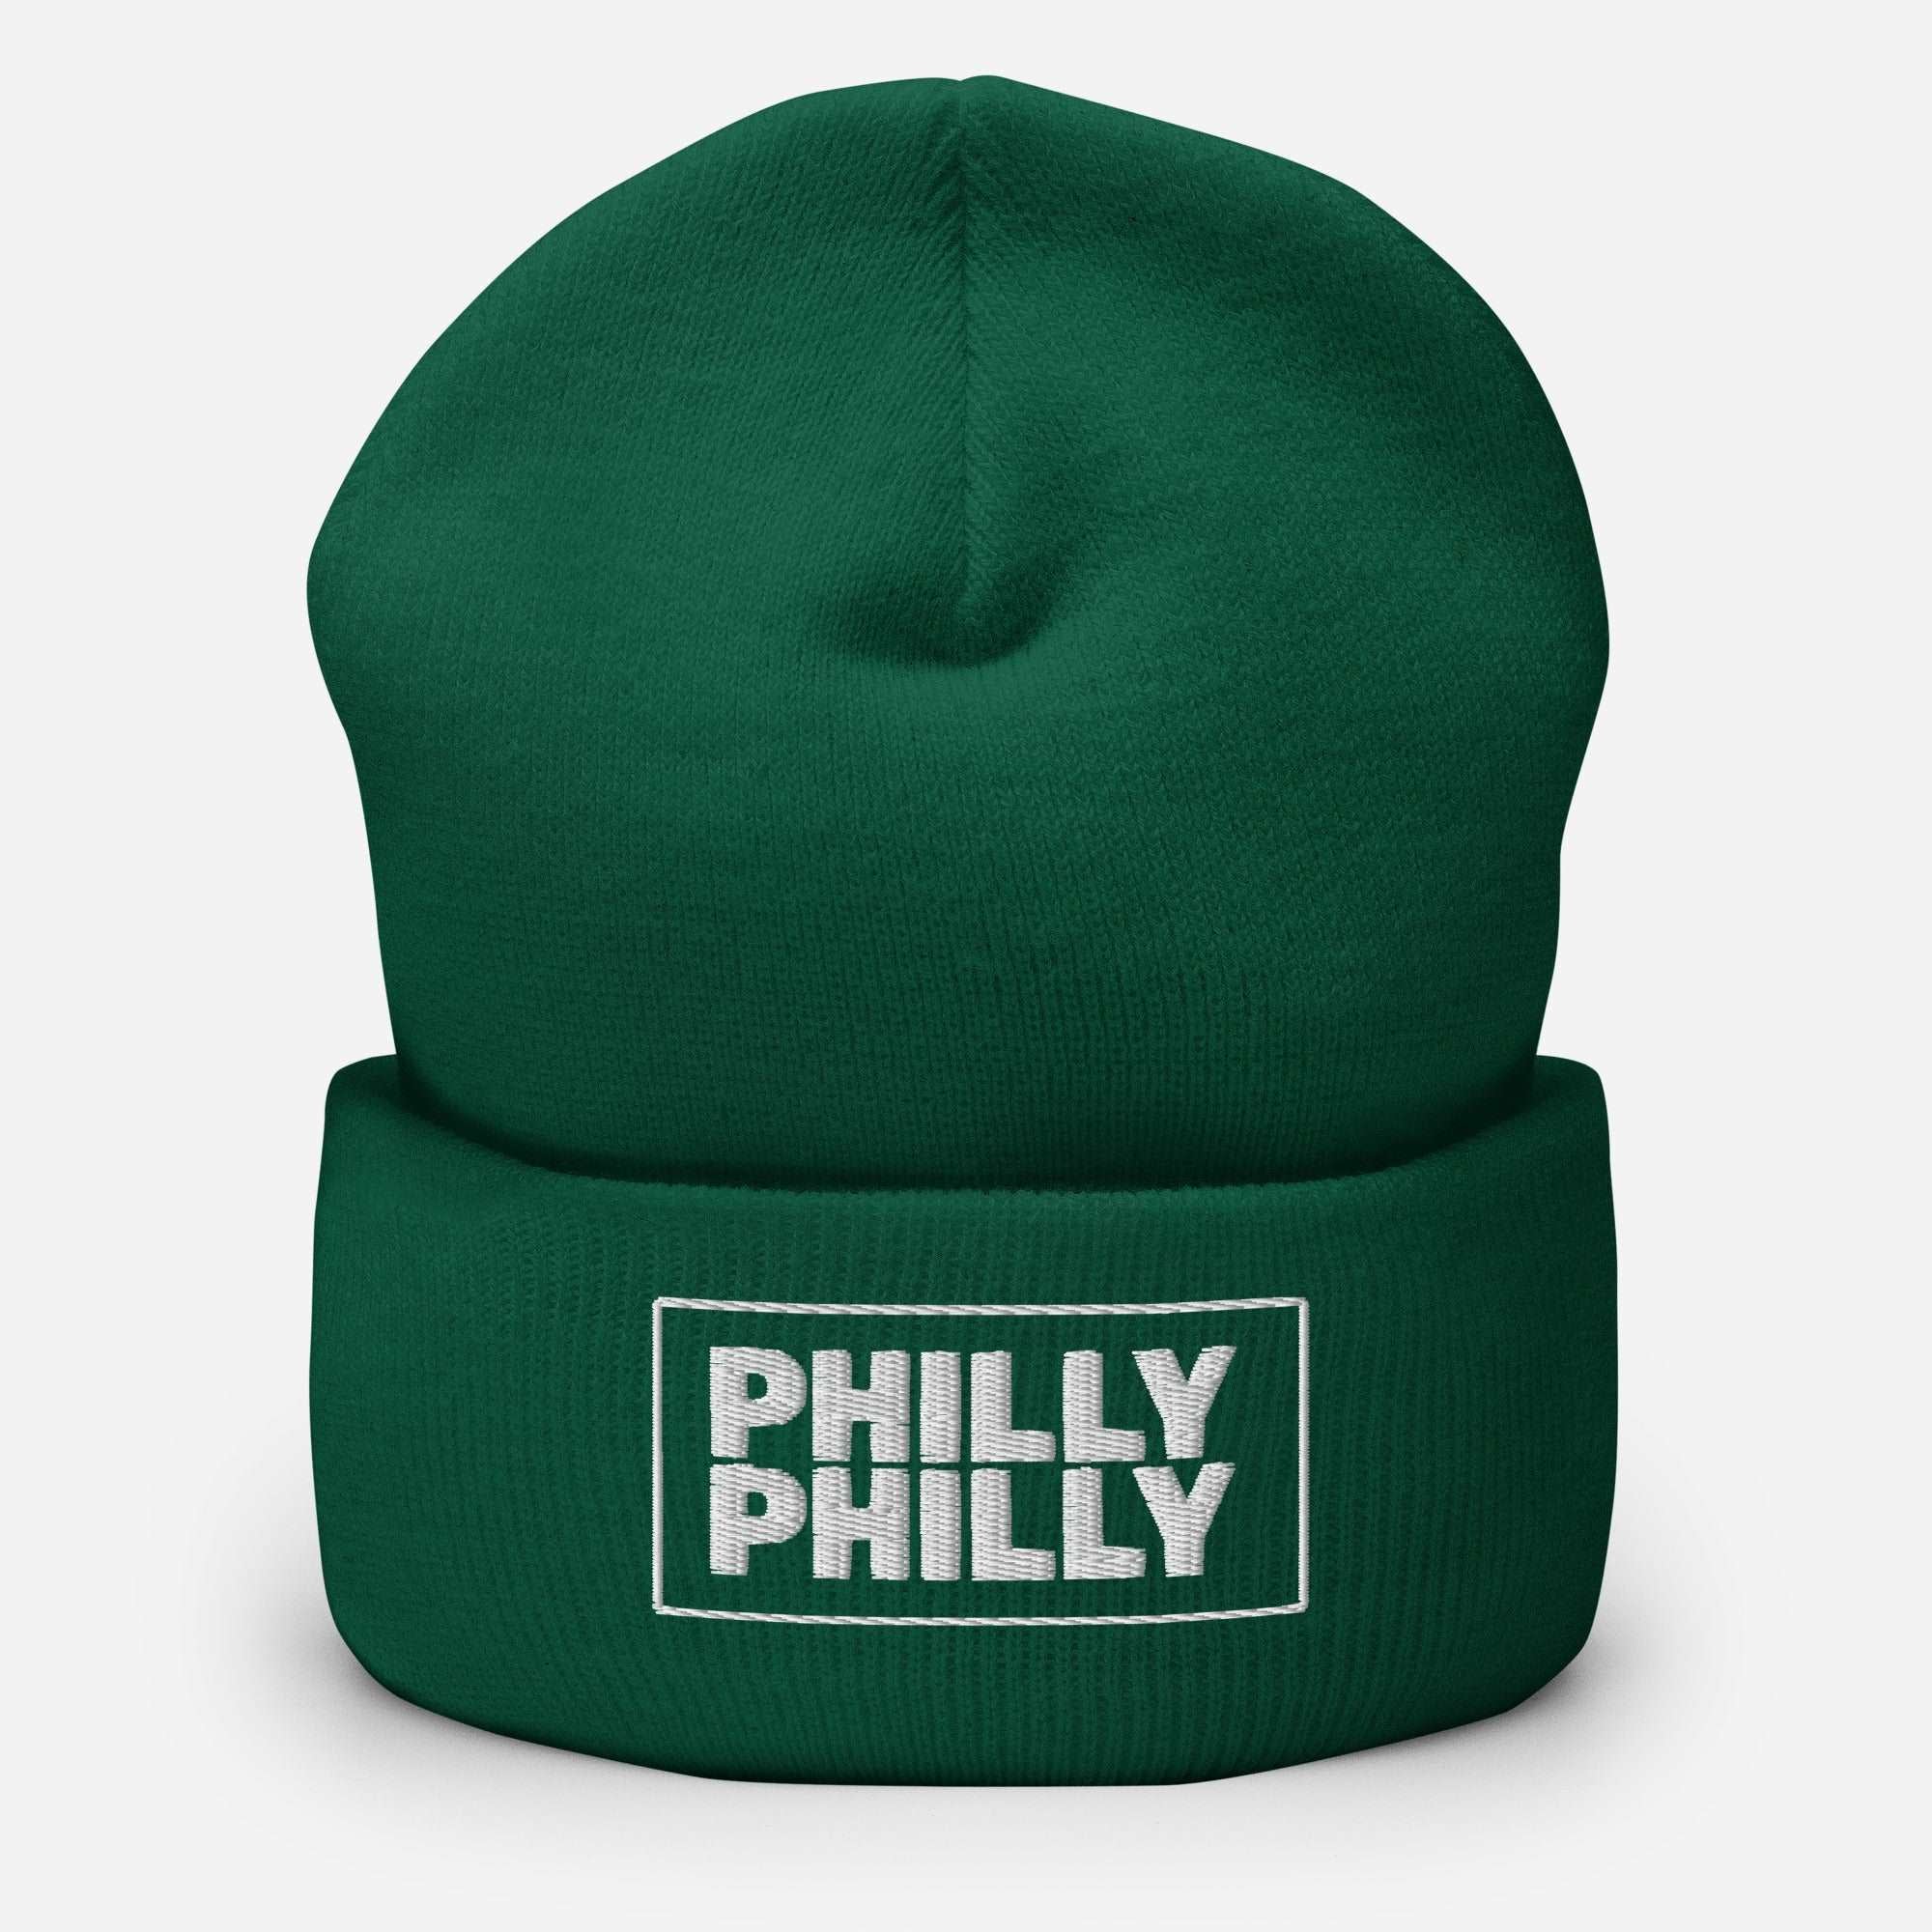 Philly Philly Beanie